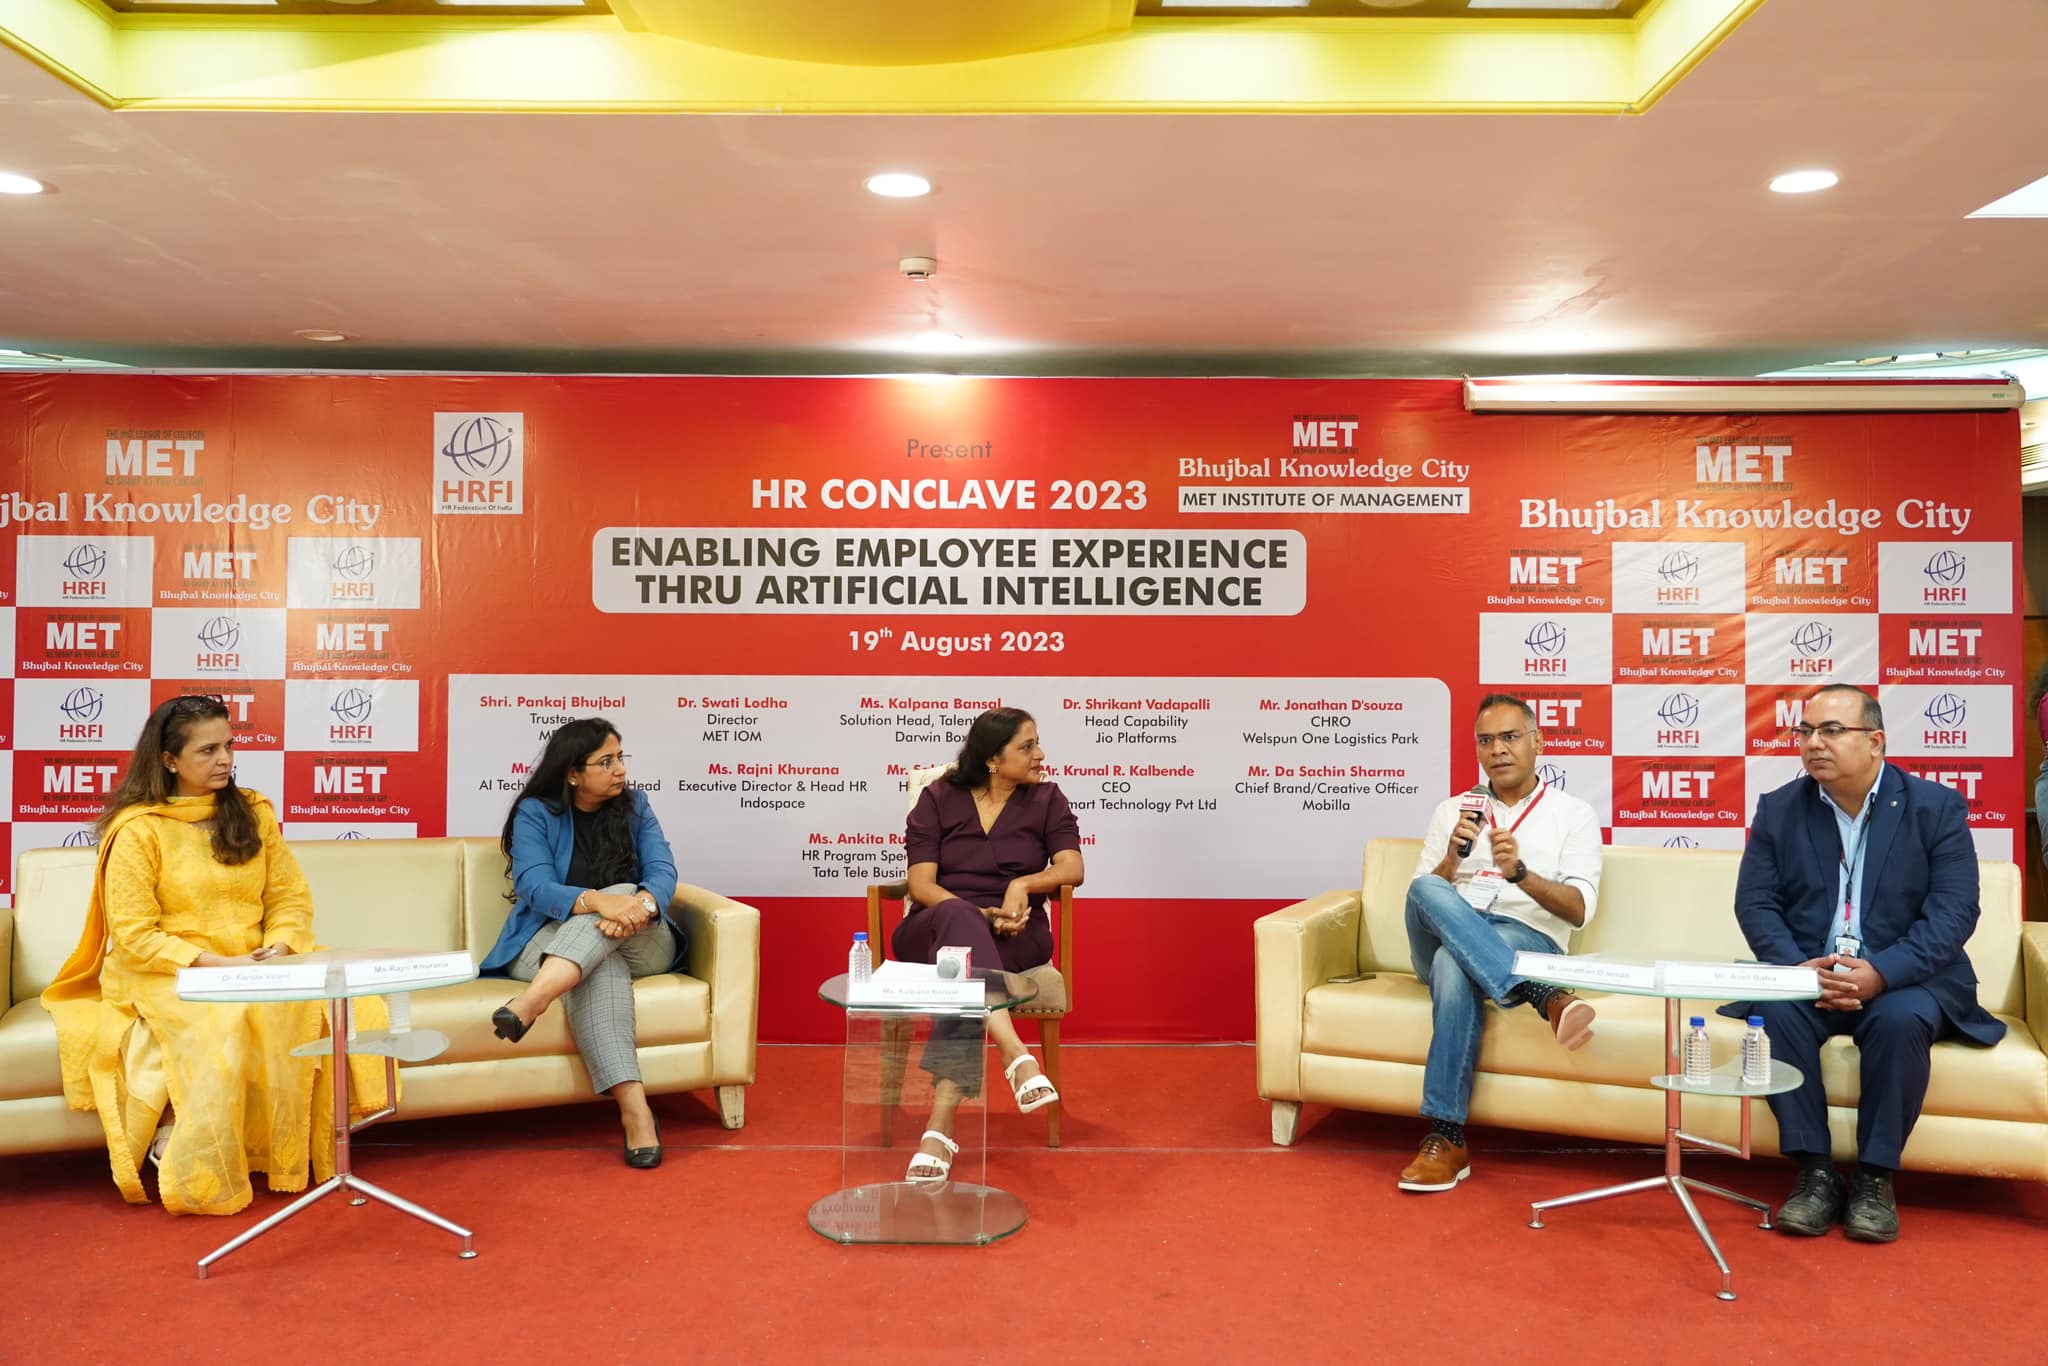 HR Conclave 2023: The Future of HR with Artificial Intelligence